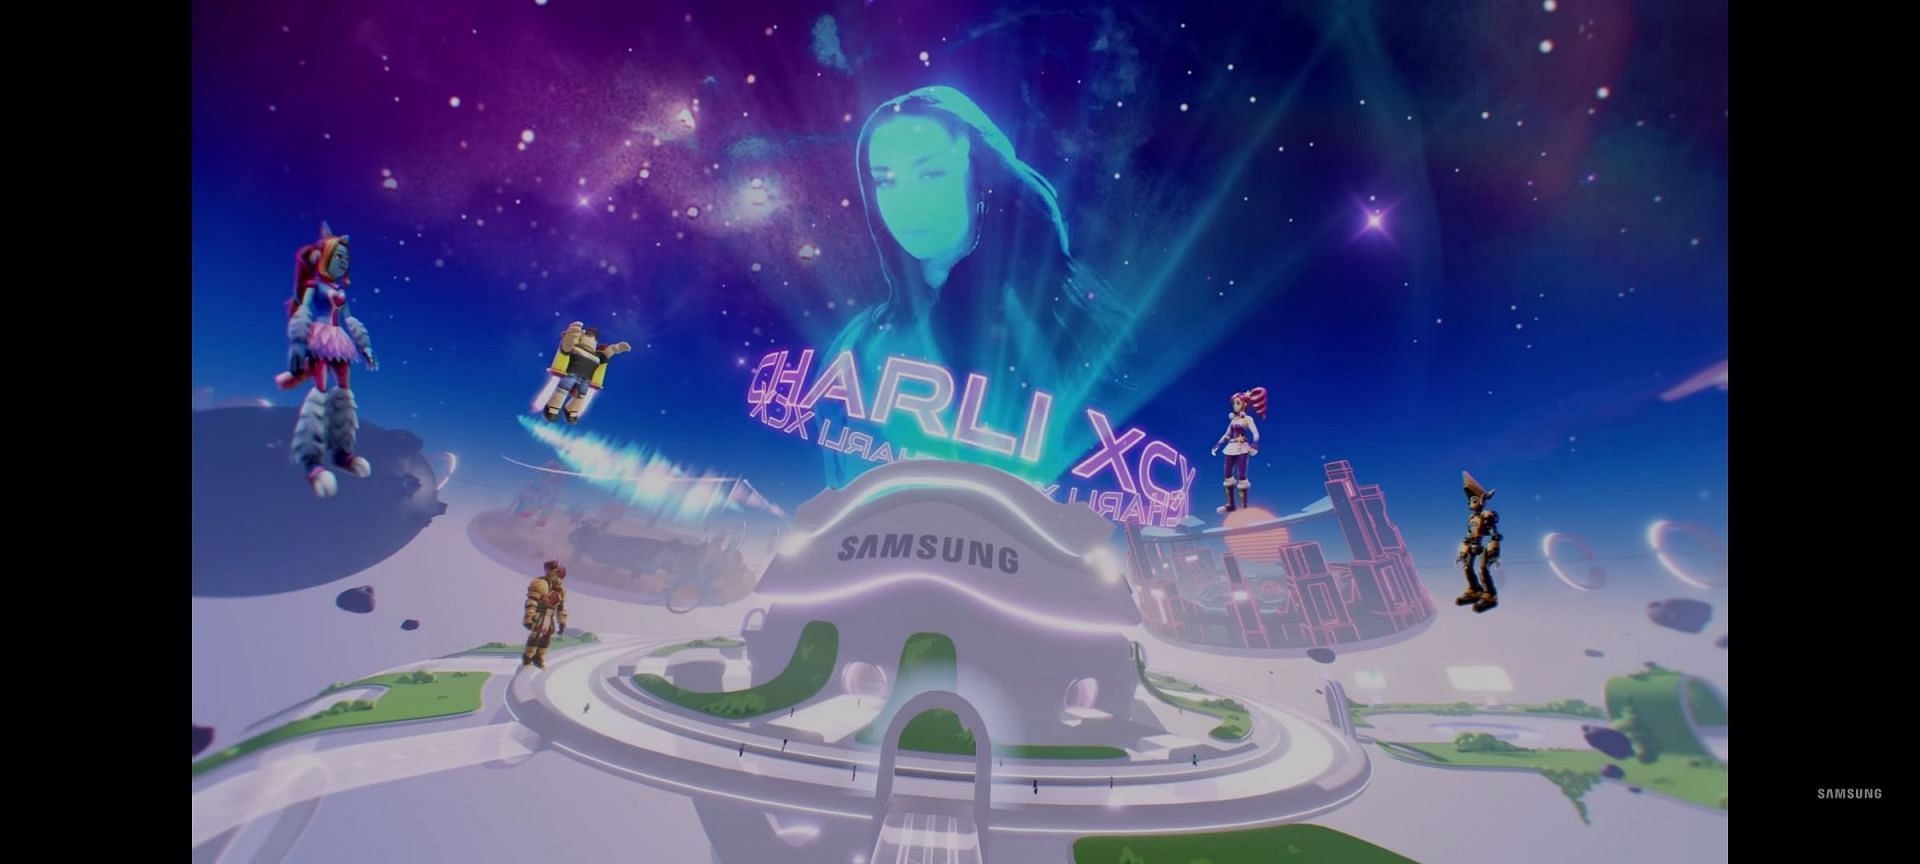 Don&#039;t miss Charli XCX&#039;s concert on Roblox (Image via Roblox)